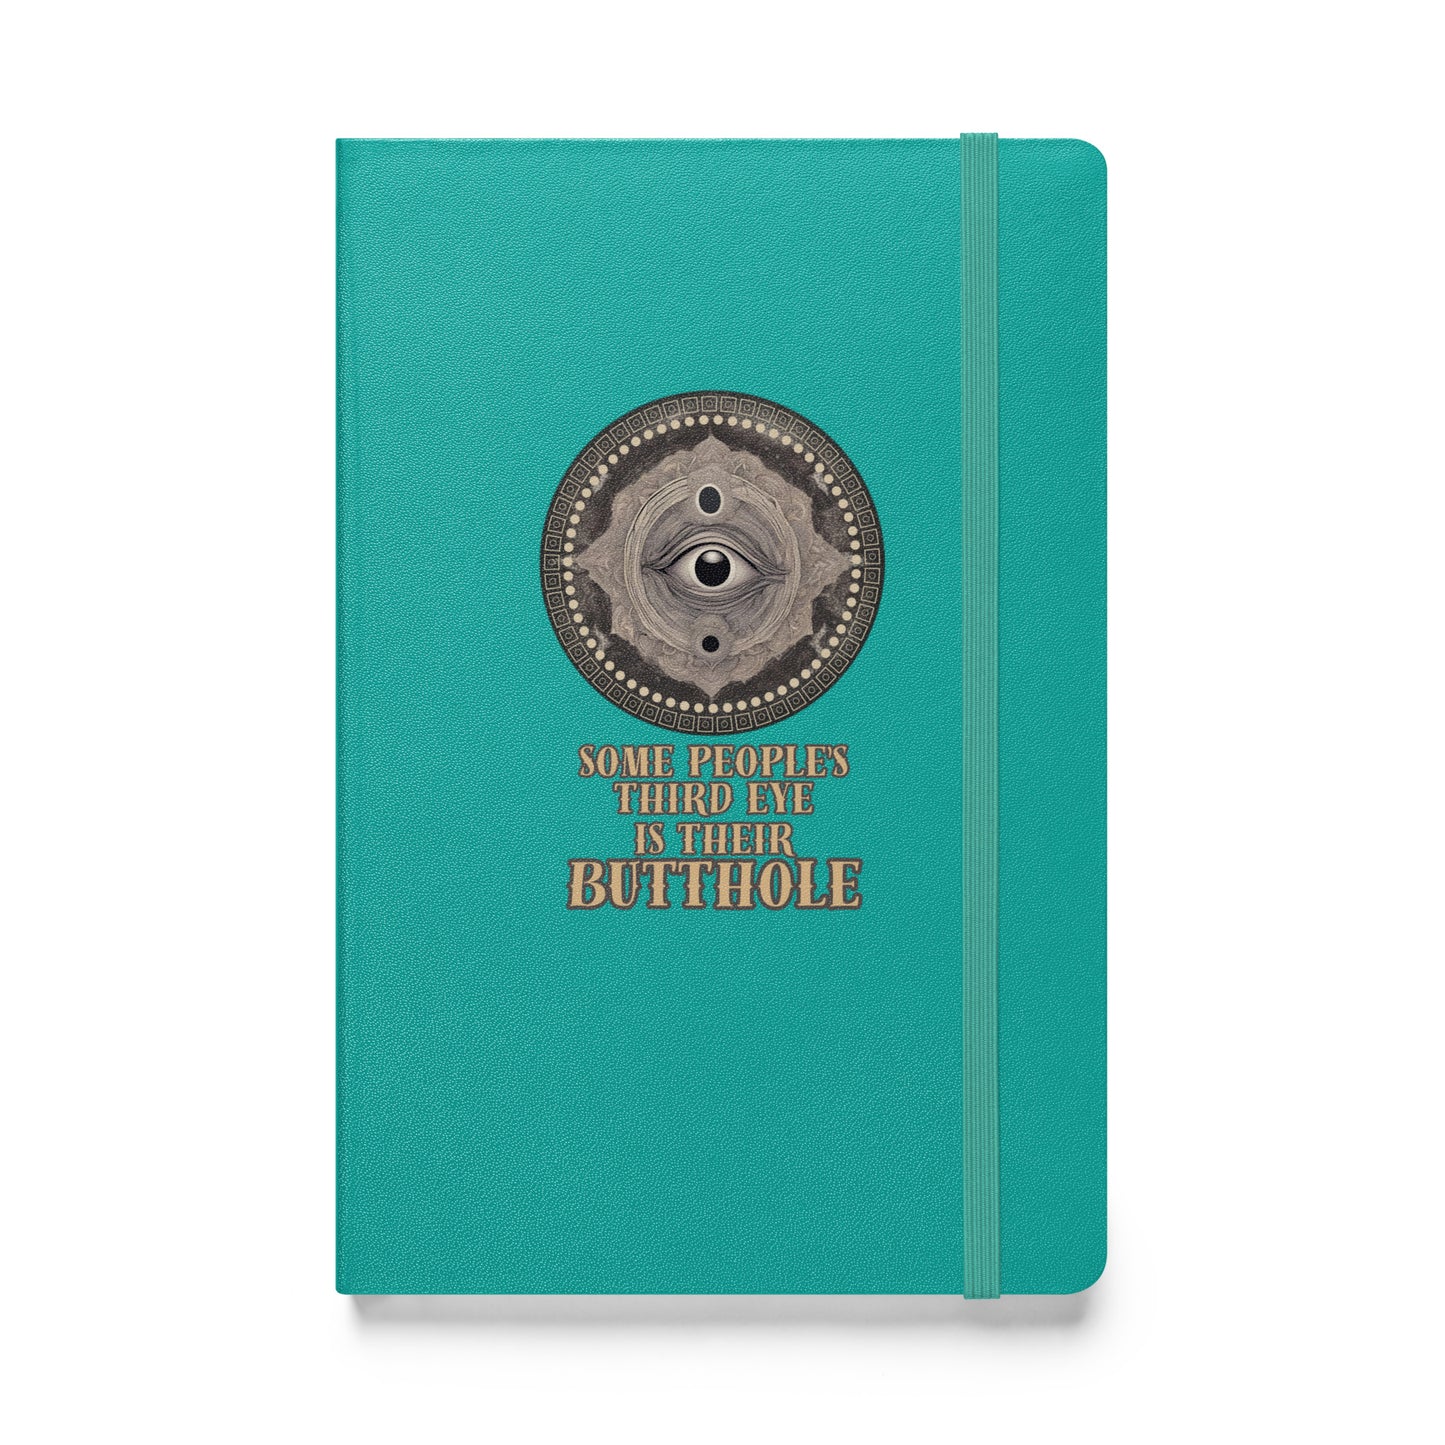 Some People’s Third Eye Is Their Butthole Hardcover bound notebook